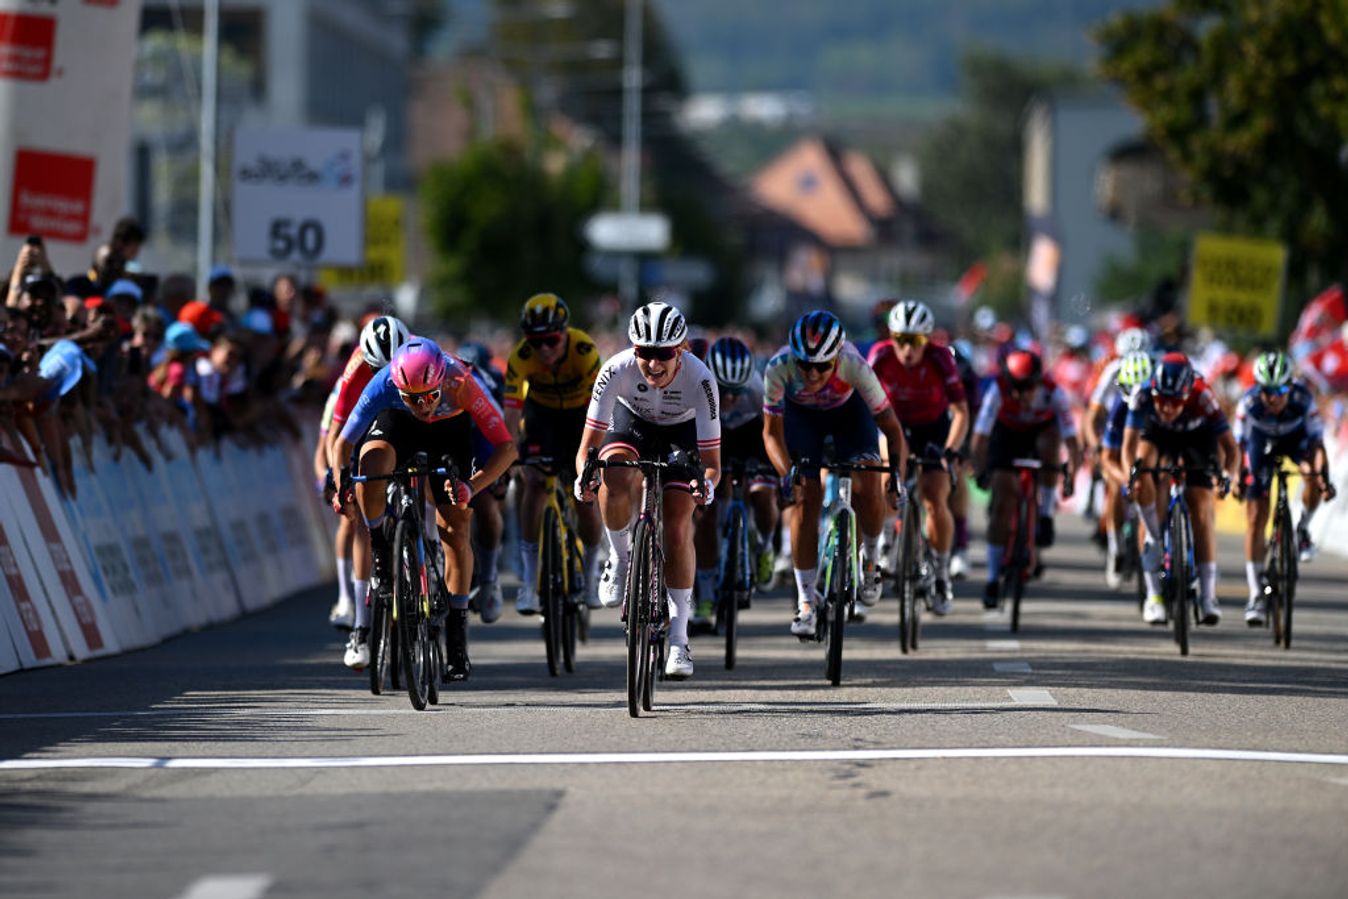 There was a nail-biting finish to the opening stage of the Tour de Romandie Féminin